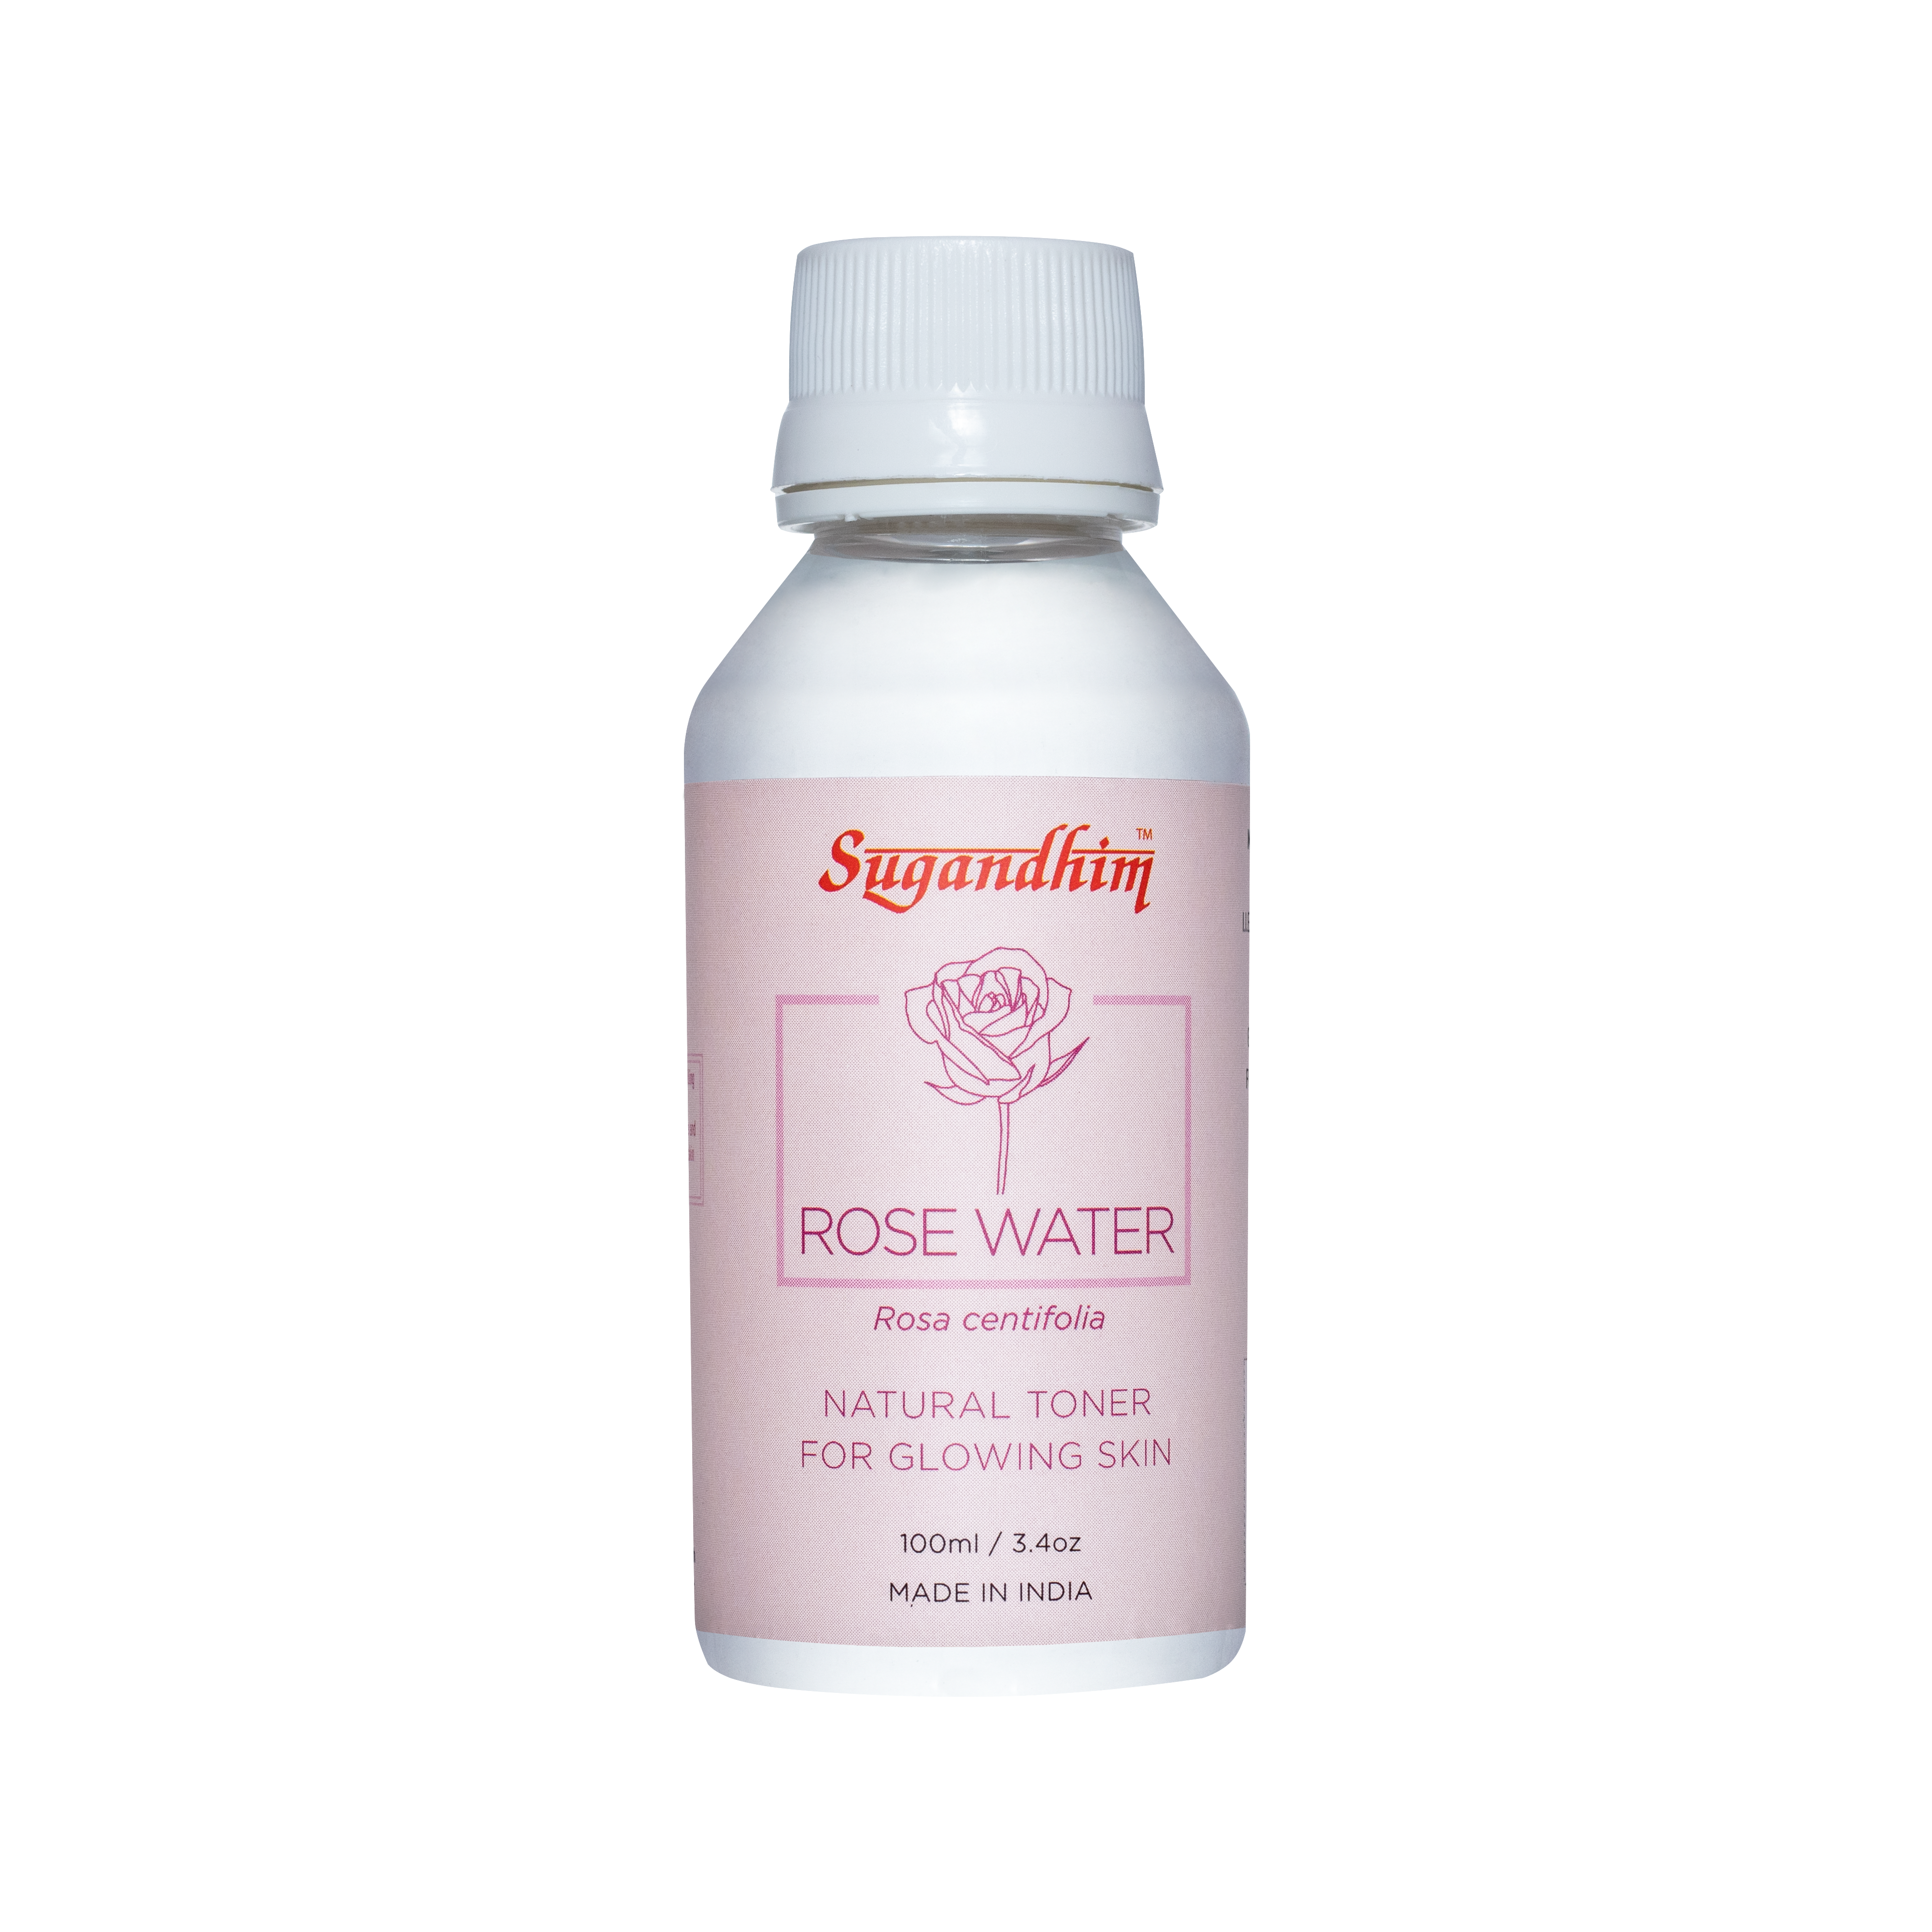 Rose Water for Hair Comes Recommended By Derms